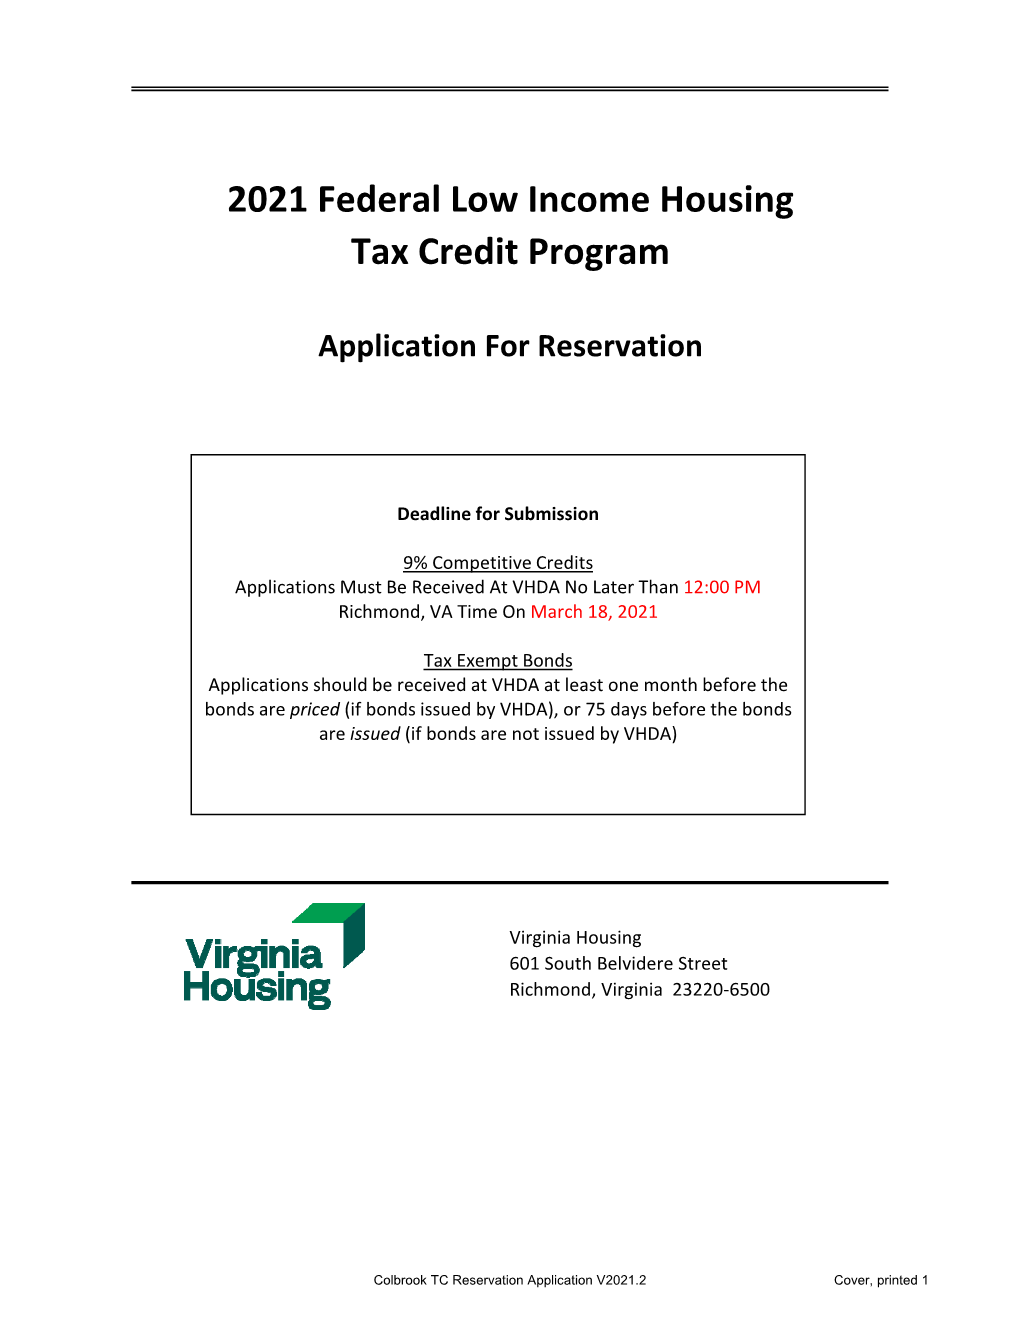 Colbrook TC Reservation Application V2021.2 Cover, Printed 1 INSTRUCTIONS for the VIRGINIA 2021 LIHTC APPLICATION for RESERVATION